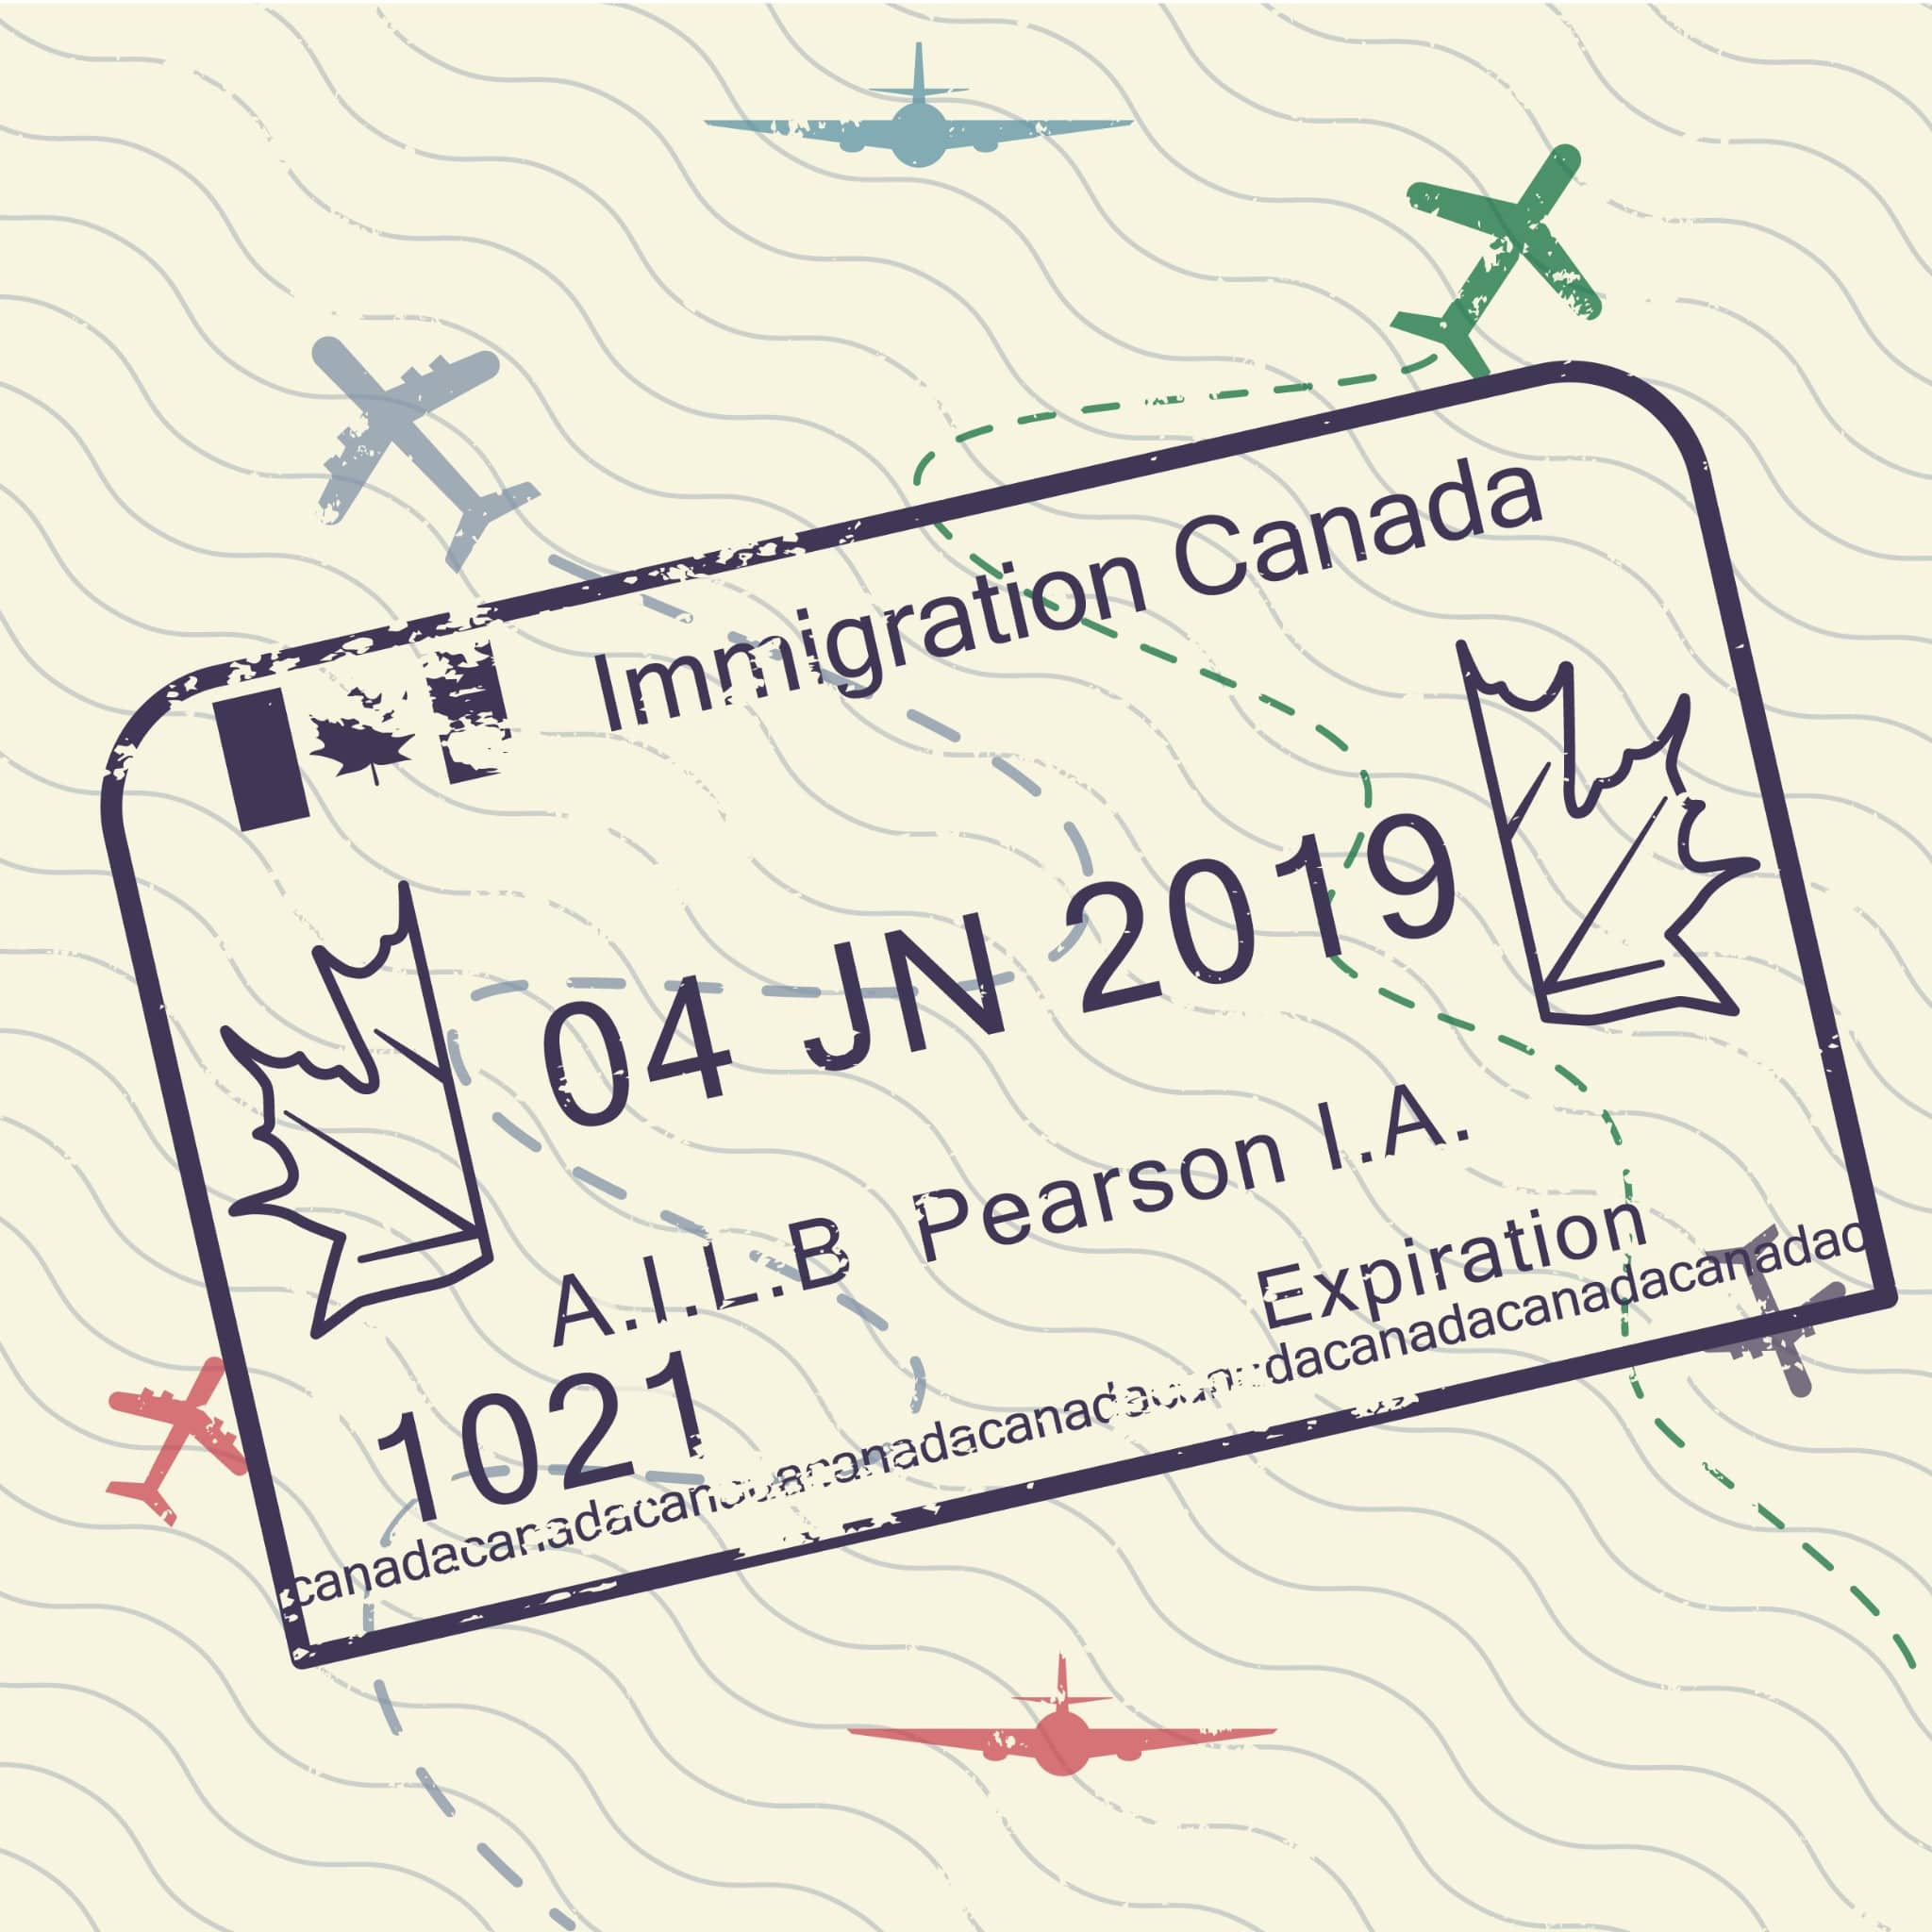 Illustration of a Canadian immigration stamp with a date of entry marked as 04 Jn 2019.